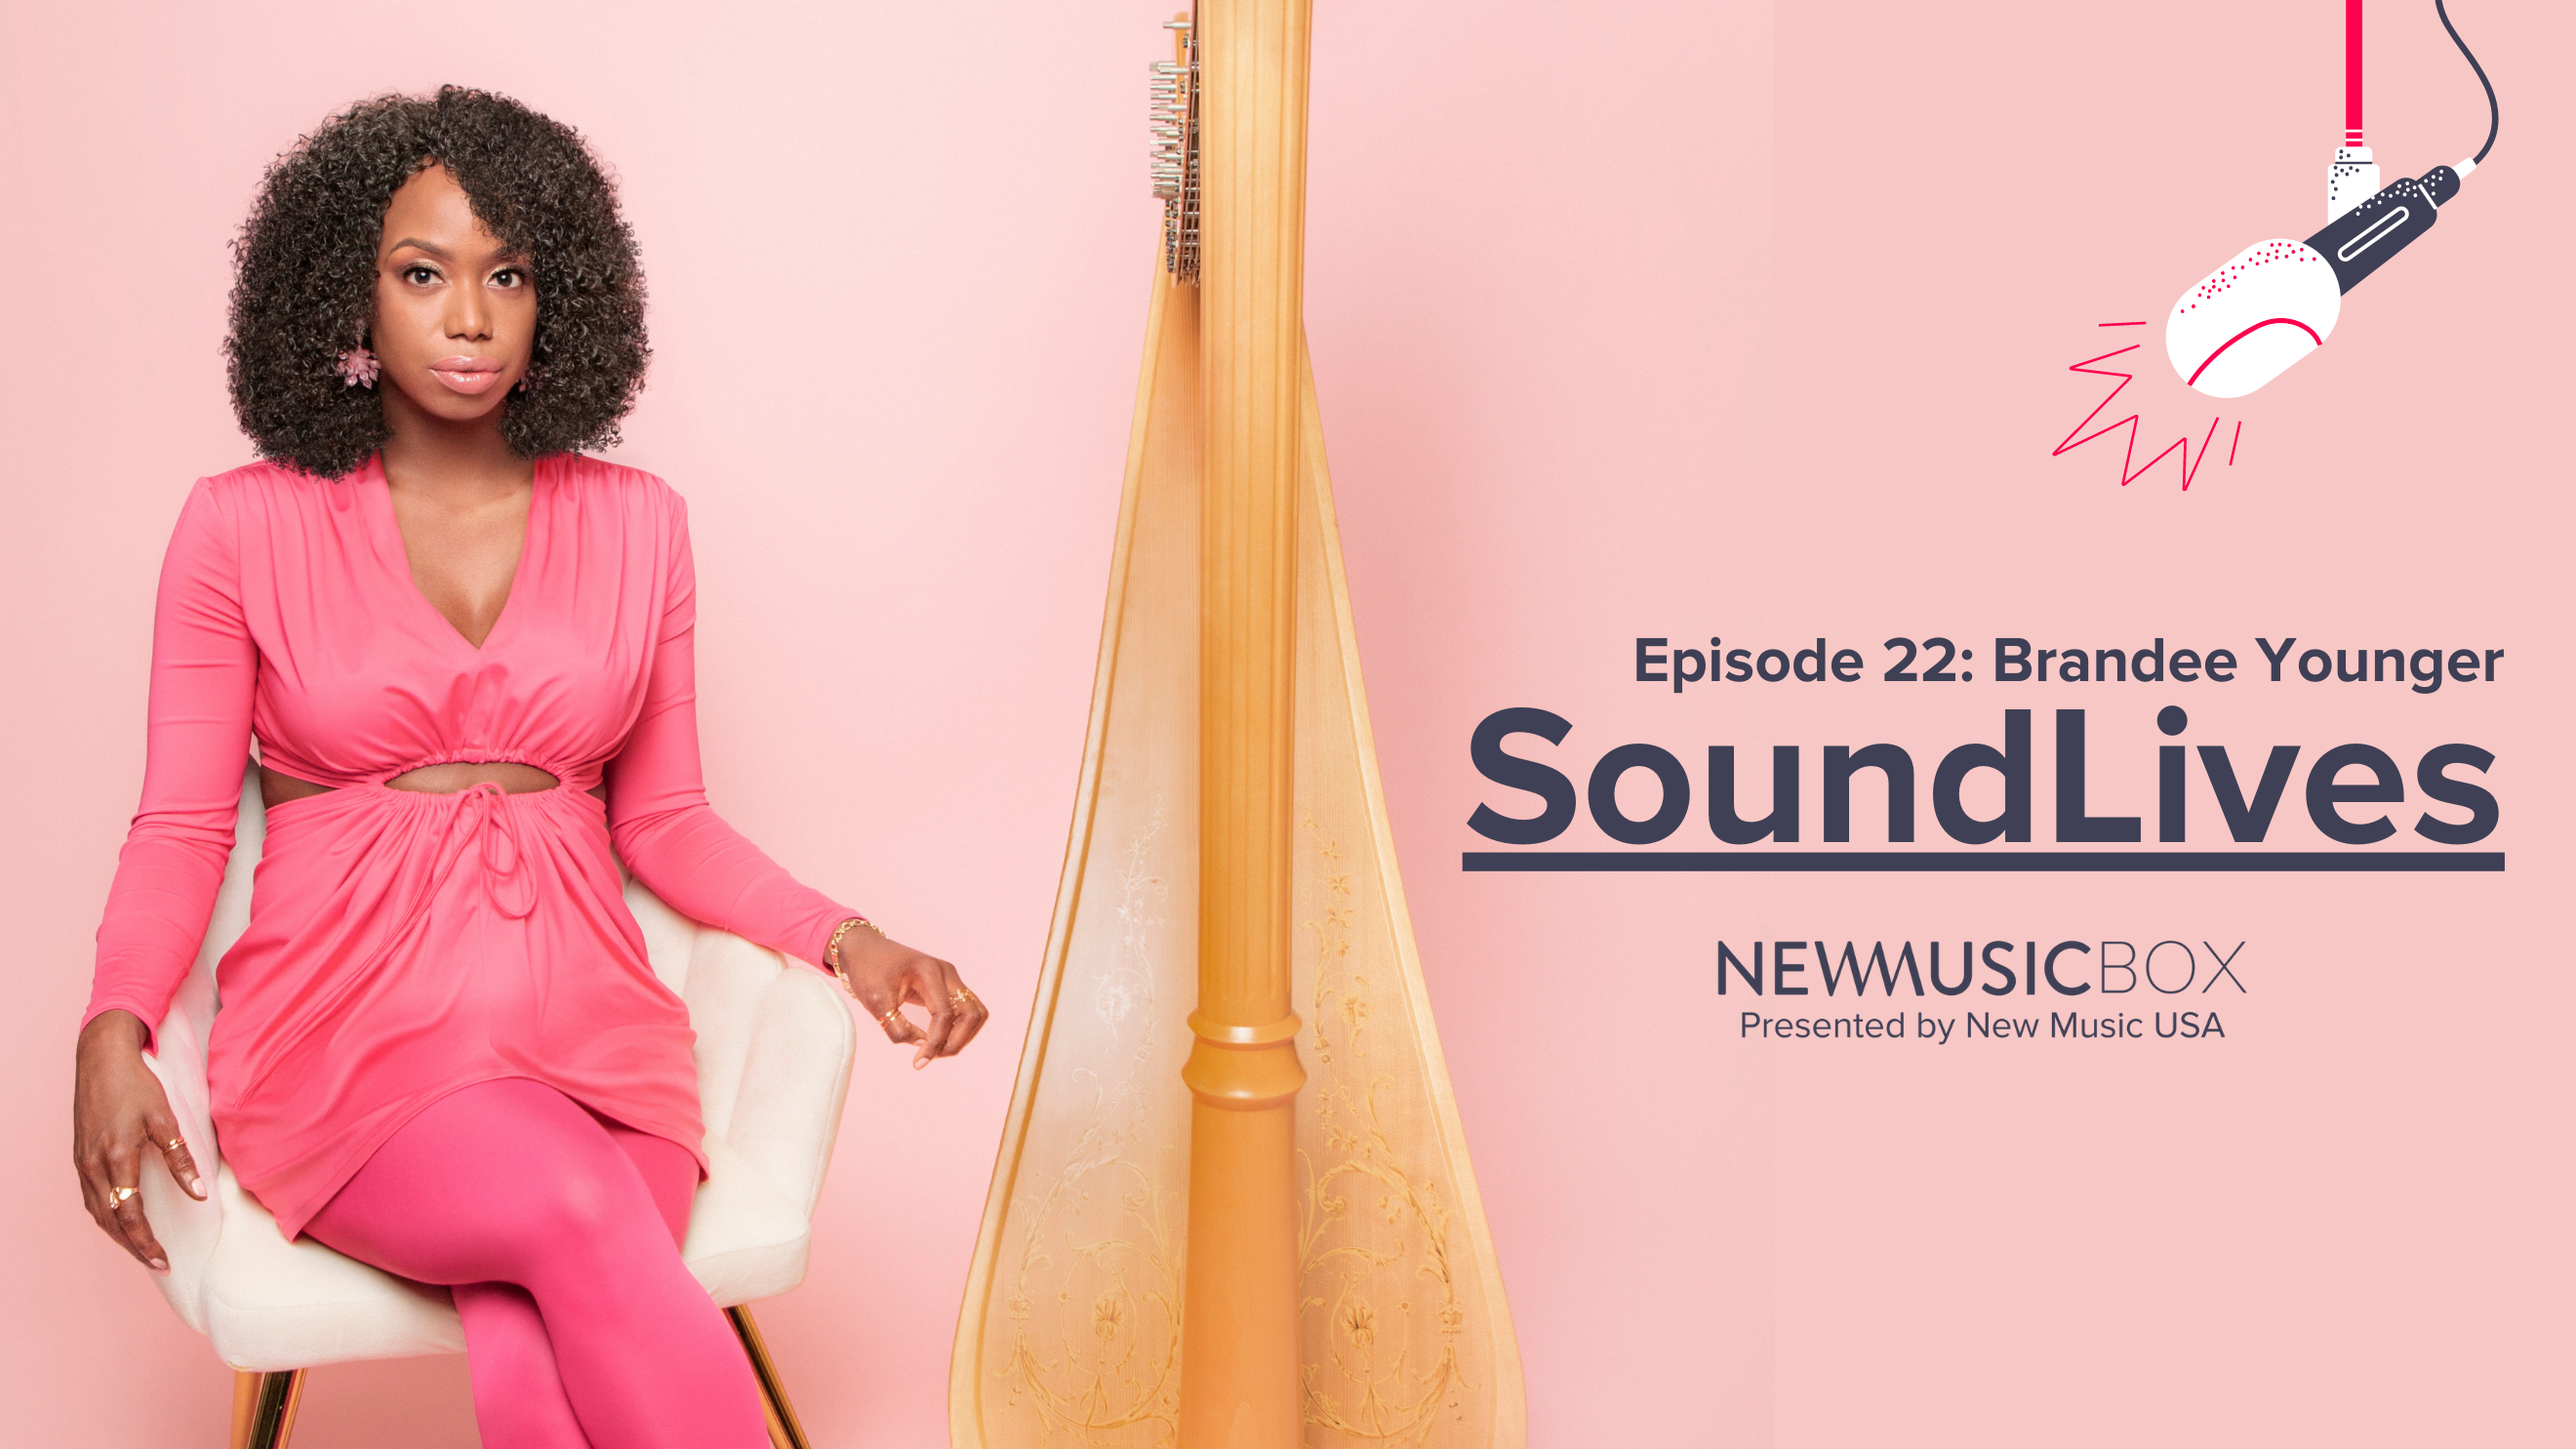 Brandee Younger sitting next to a harp with the branded text for episode 22 of the NewMusicBox SoundLives podast from New Music USA